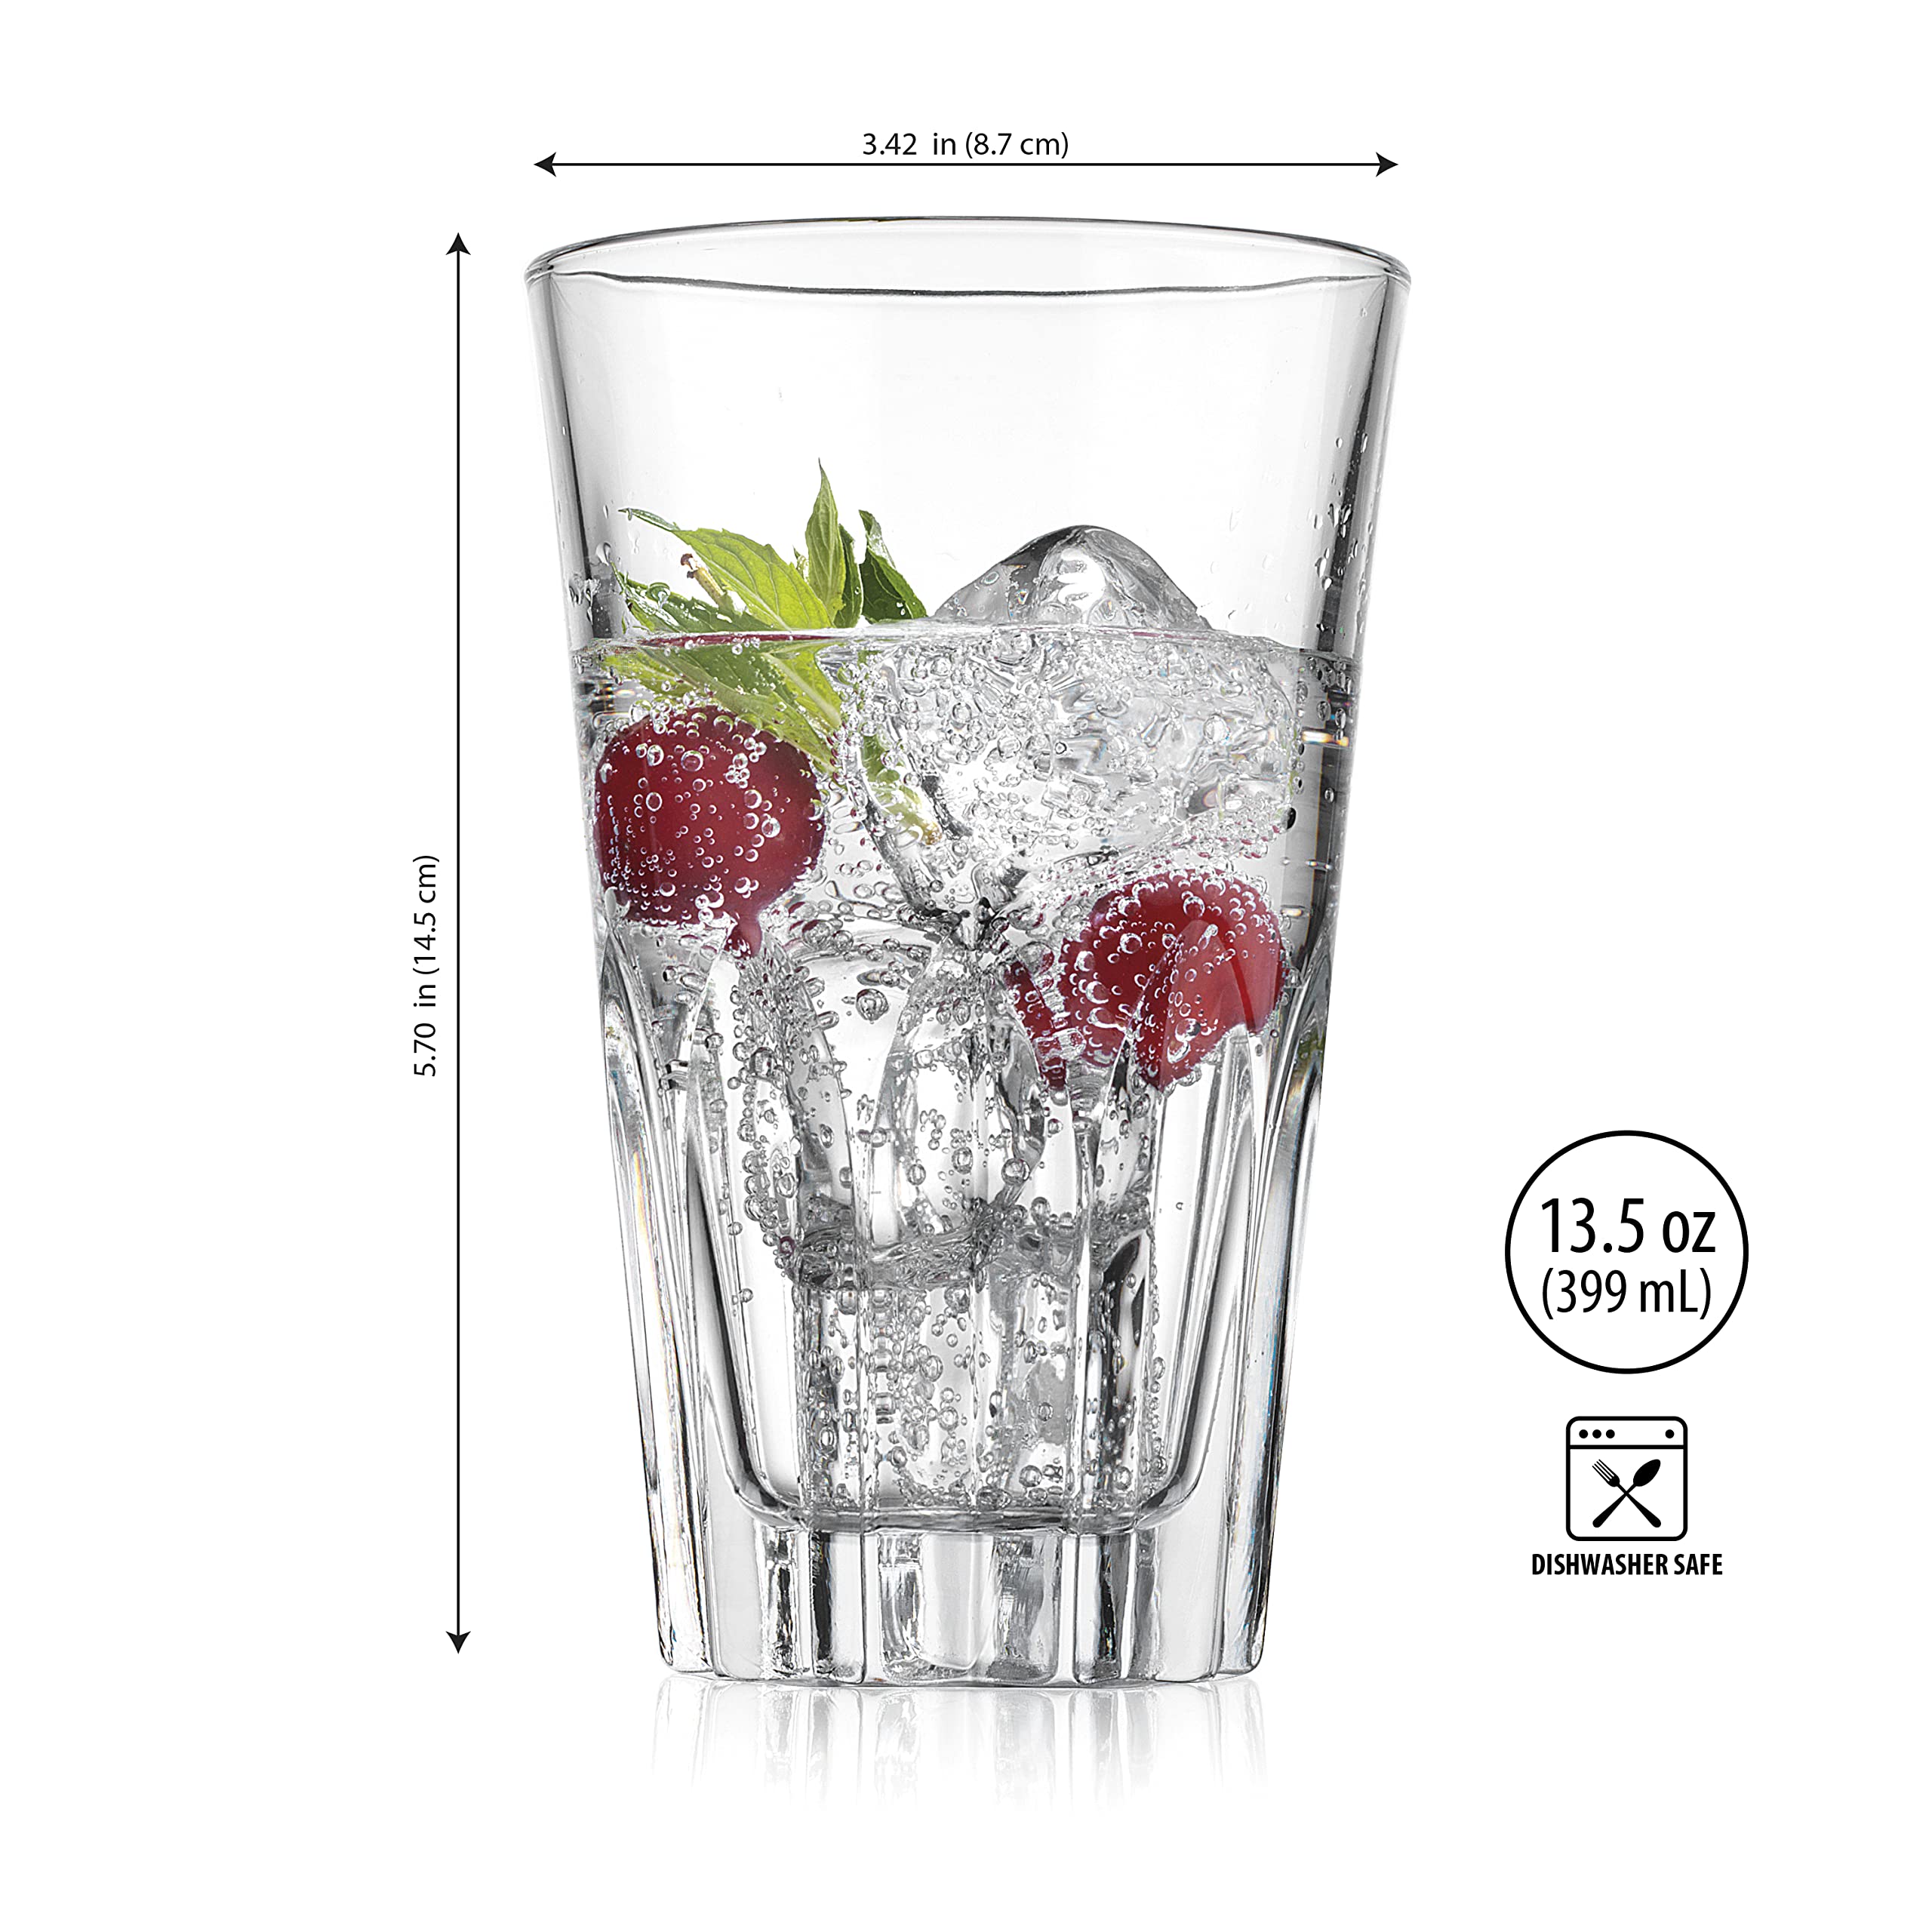 Glaver's Classic Drinking Glasses Set Of 4 Old Fashioned Highball Glass Cups 13.7 Oz, Diamond Cut Glass For Bar Glasses, Water, Beer, Juice, Cocktails  - Like New